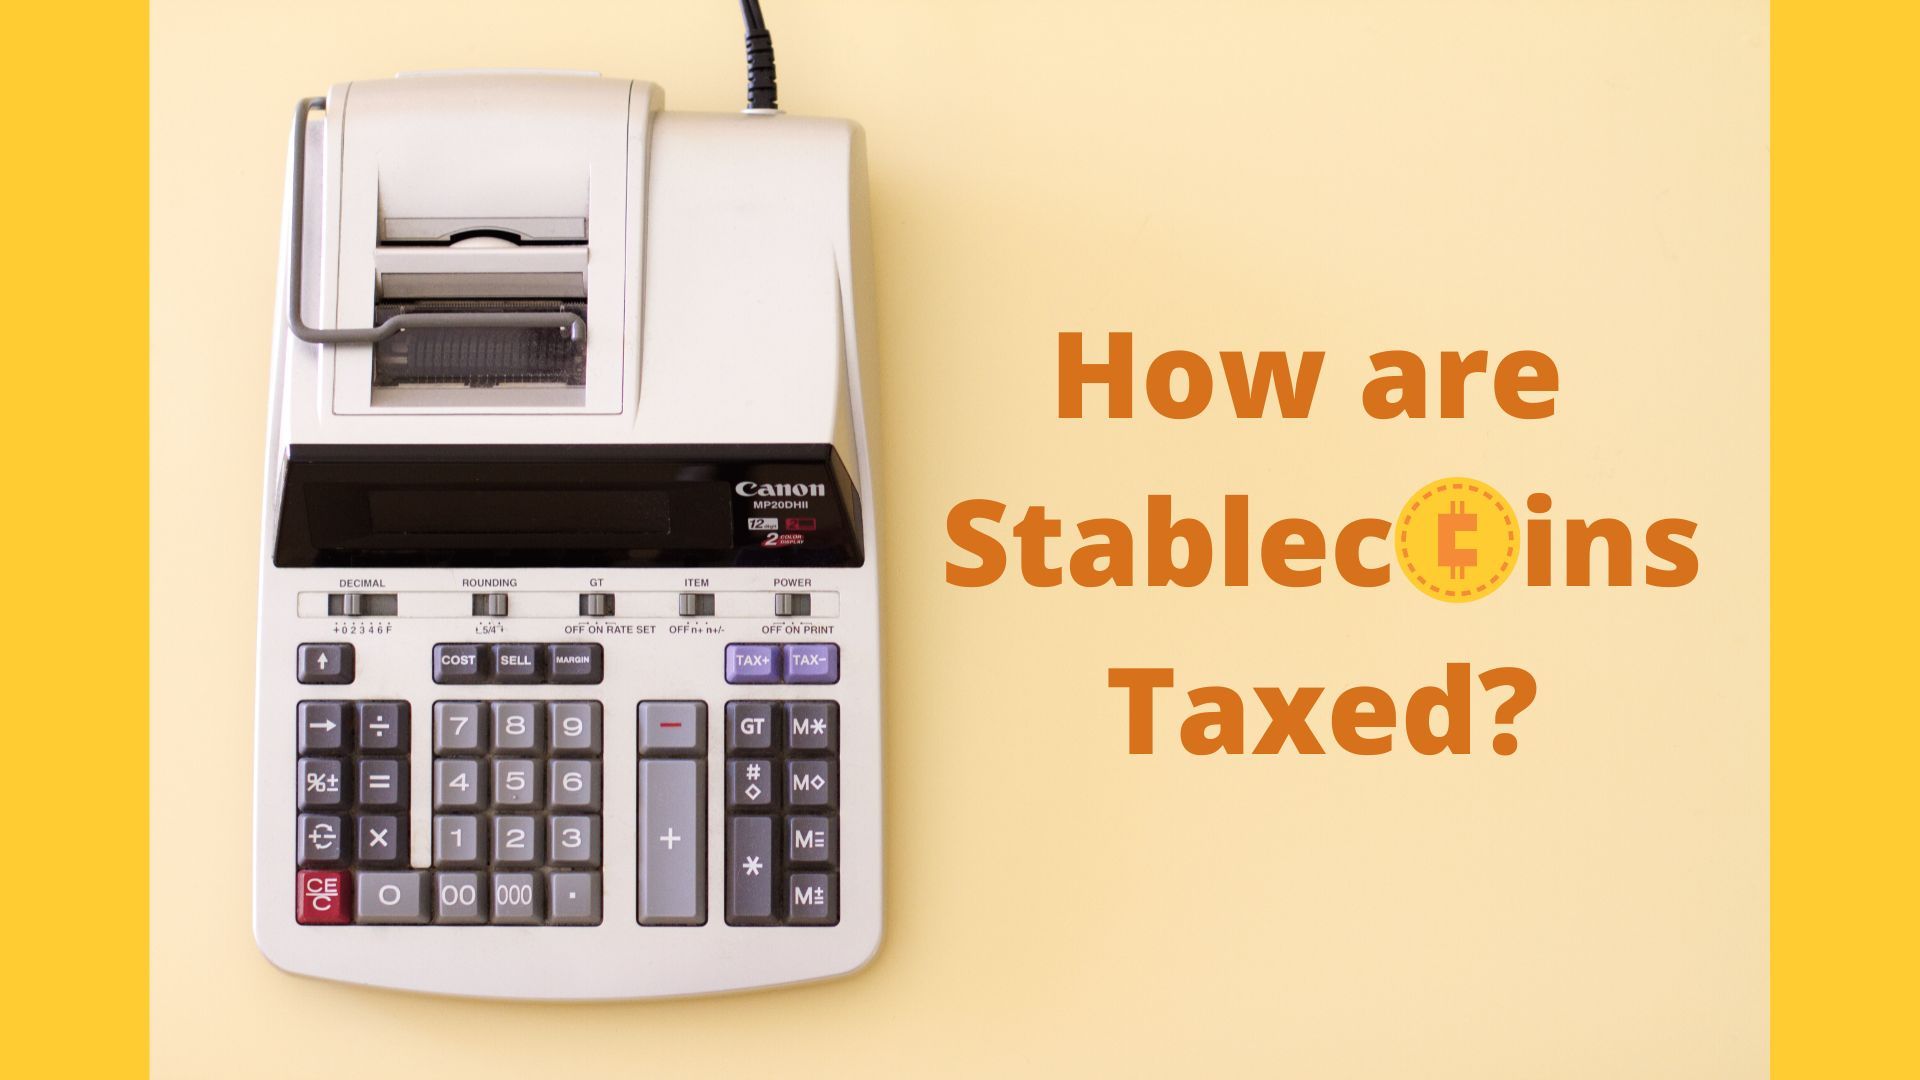 Canon accounting calculator with the words "how are stablecoins taxed?" 